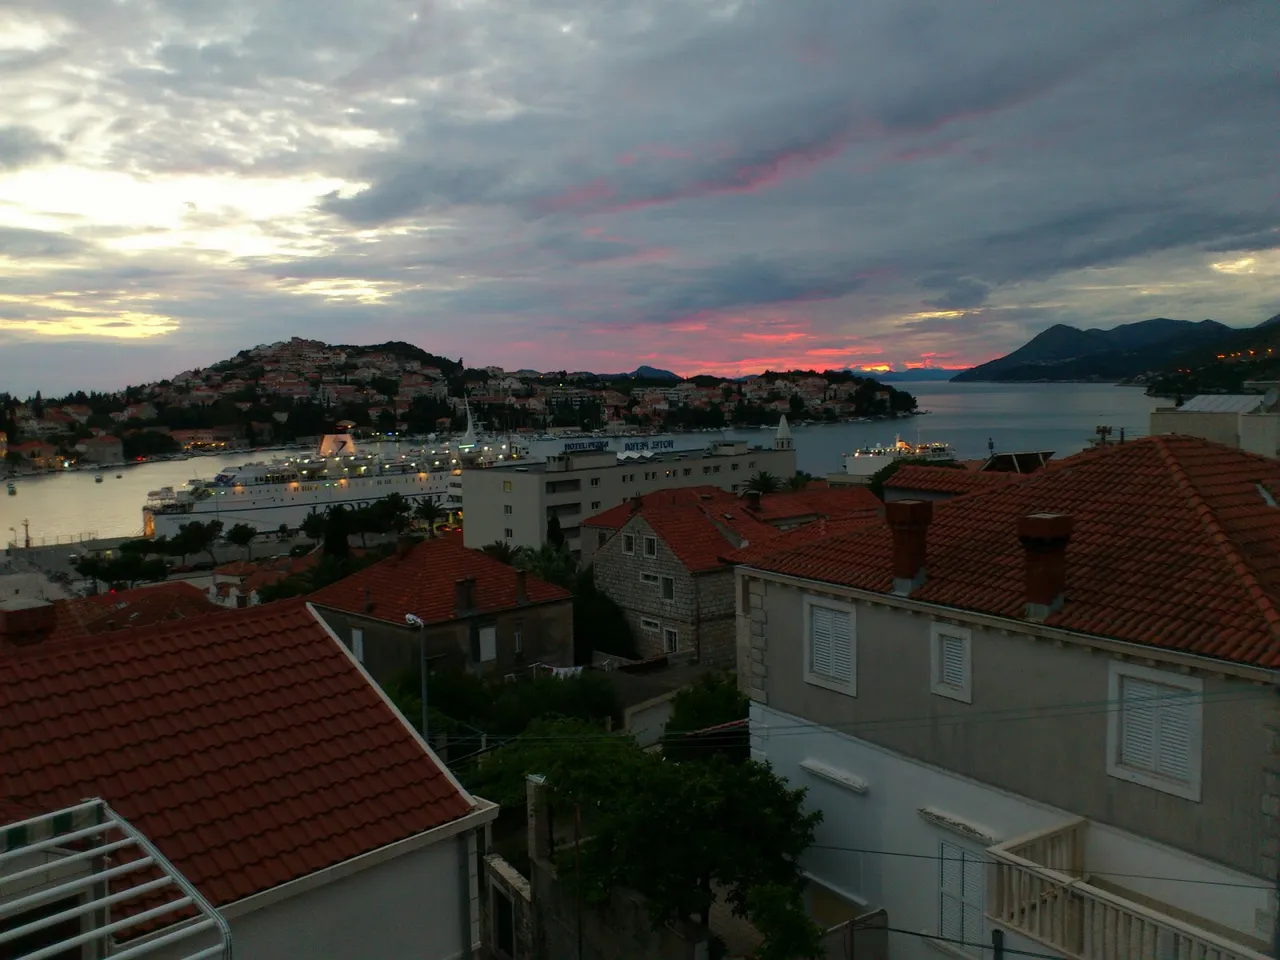 Sun setting behind the clouds. Good bye Dubrovnik.